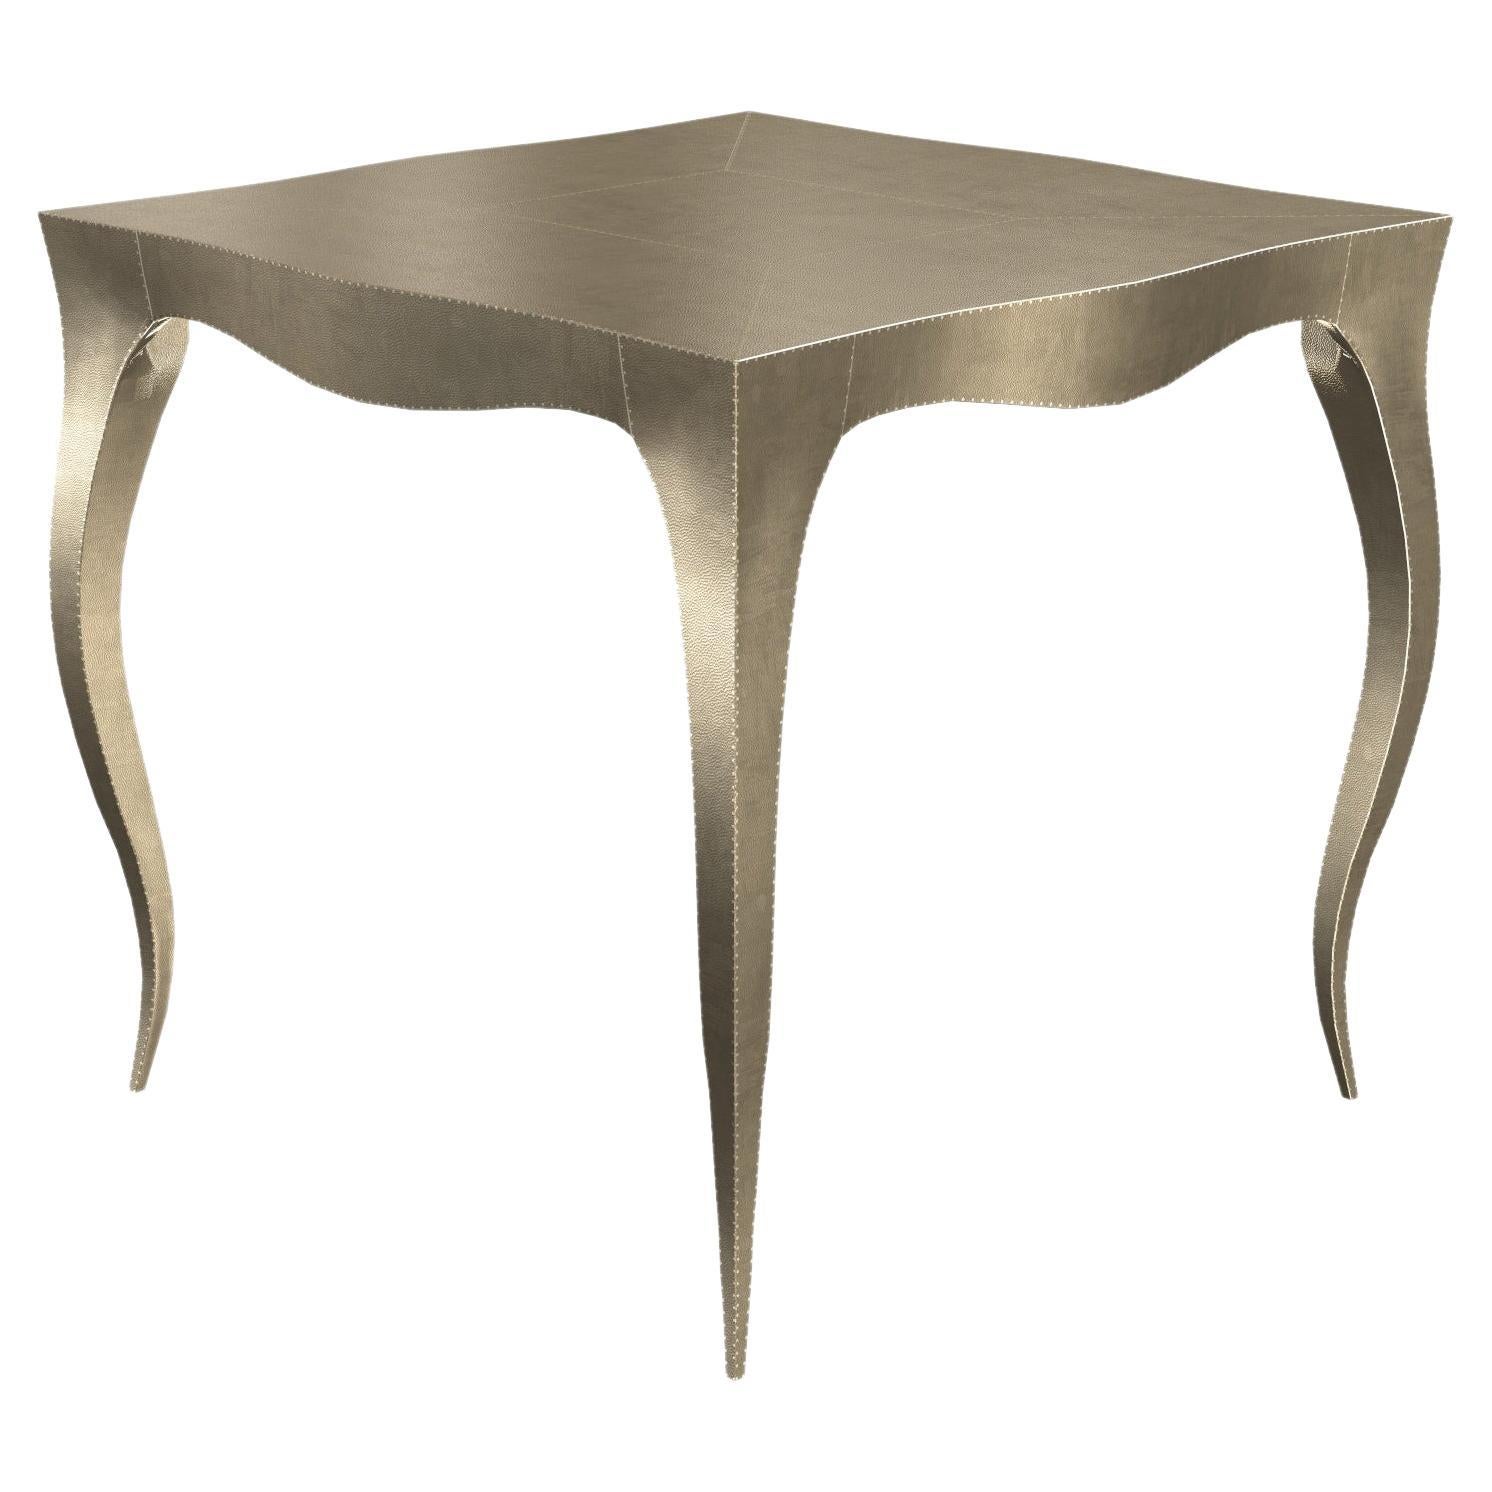 Louise Art Deco Coffee and Cocktail Tables  Mid. Hammered Brass by Paul Mathieu  For Sale